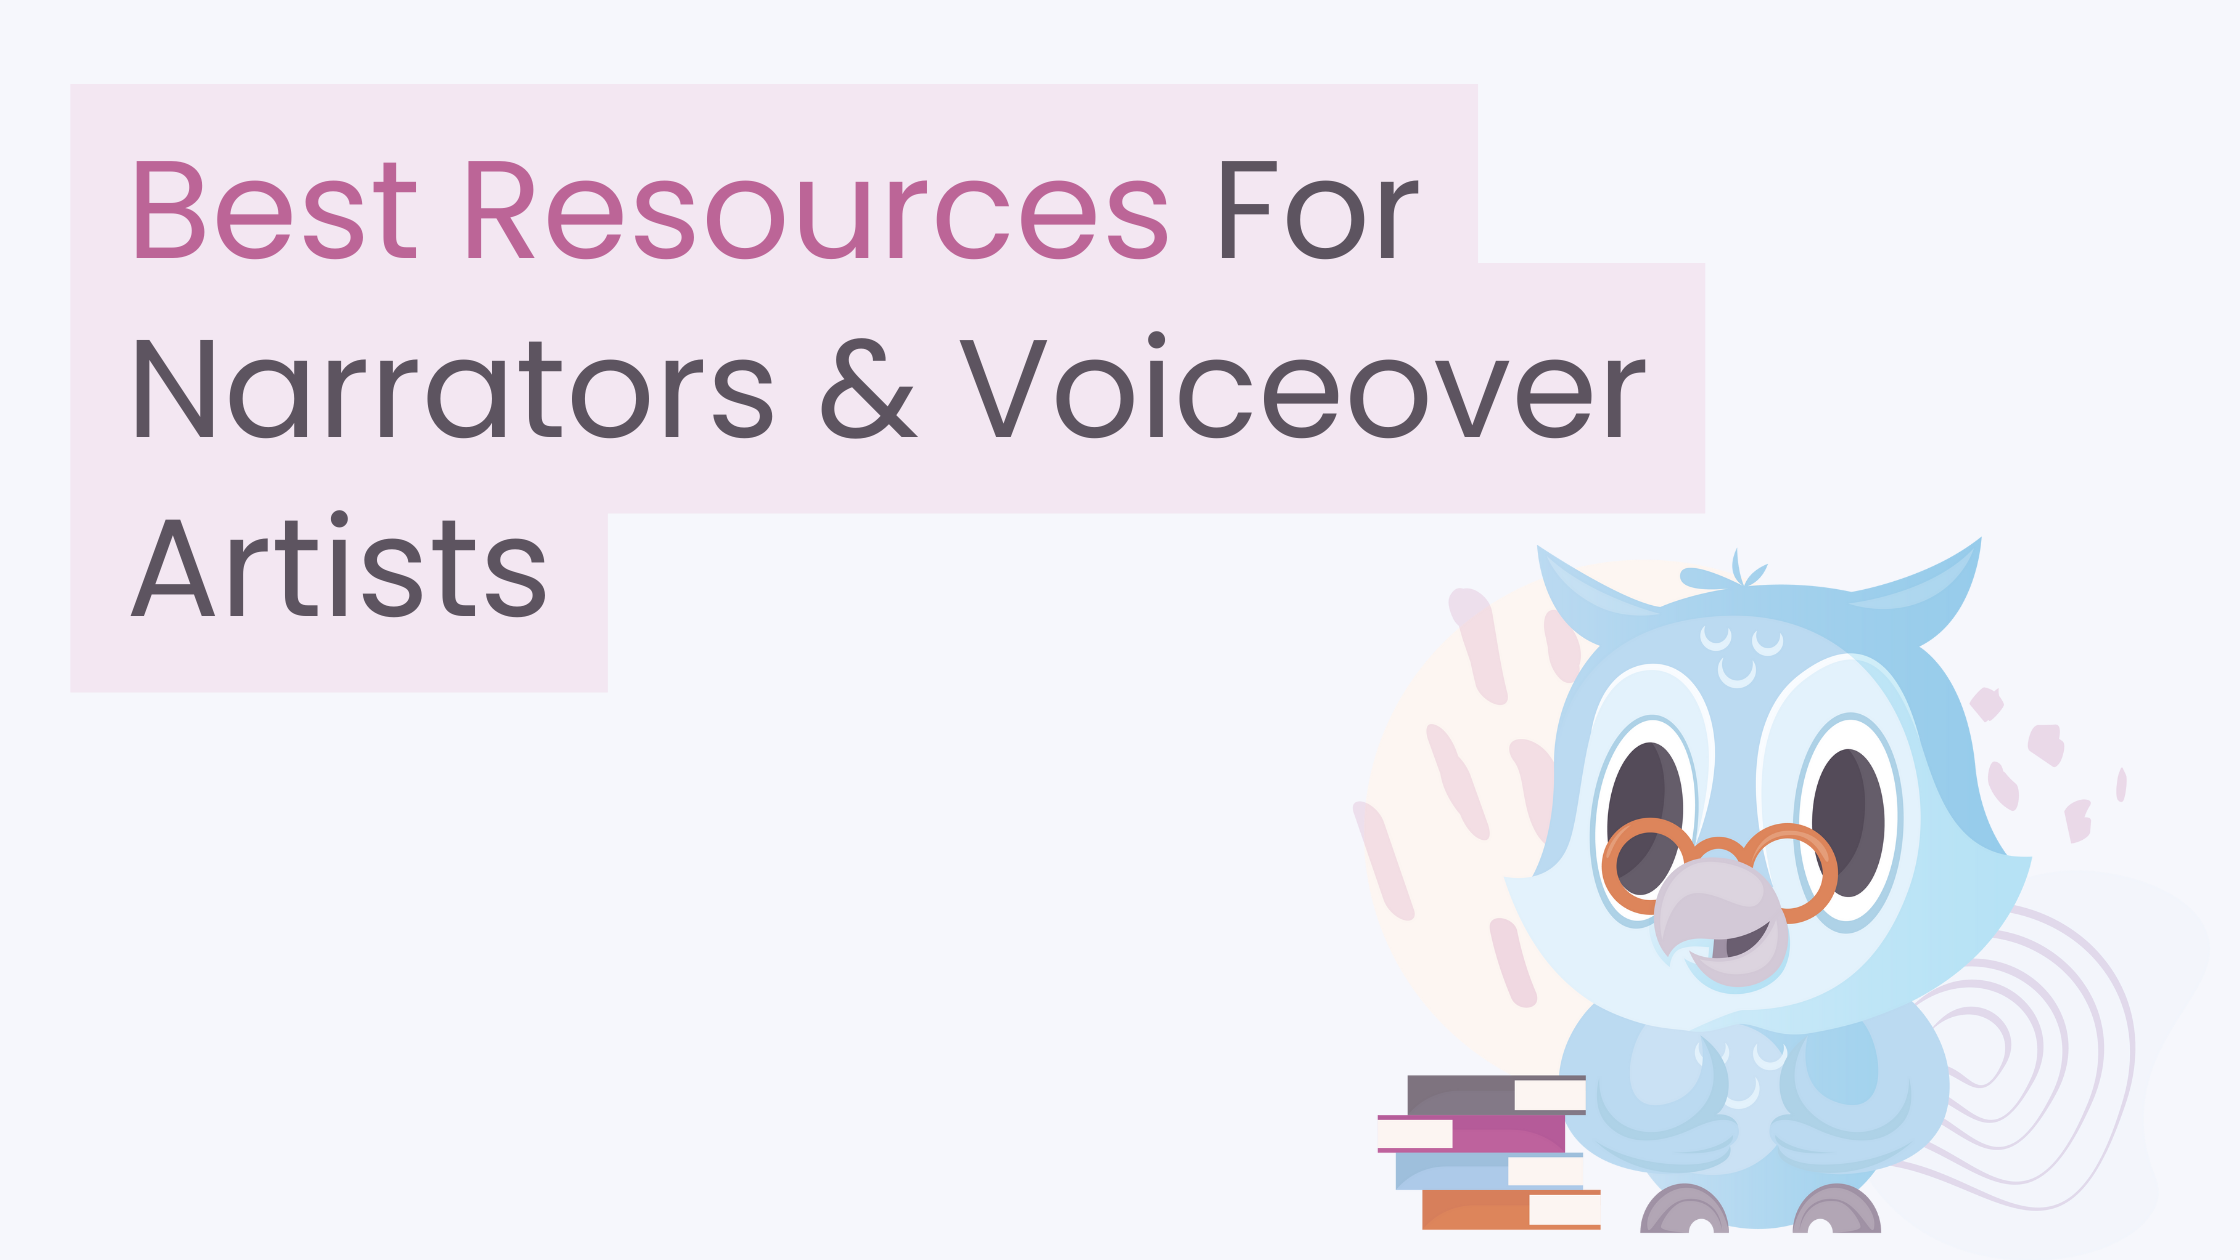 Best Resources For Narrators & Voiceover Artists